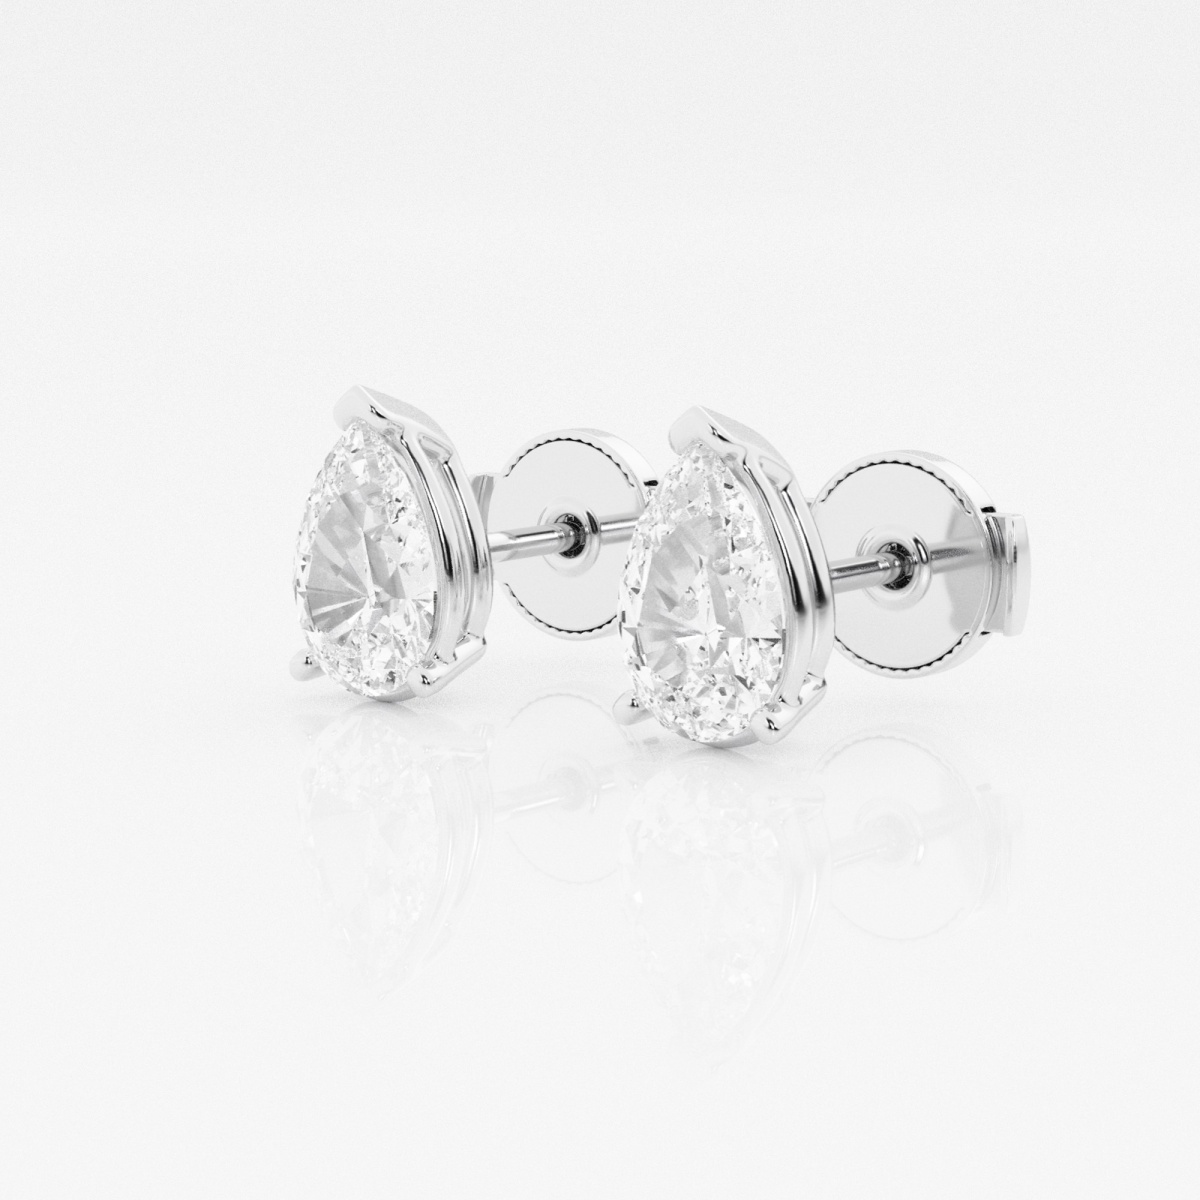 Additional Image 1 for  1 1/2 ctw Pear Lab Grown Diamond Solitaire Certified Stud Earrings